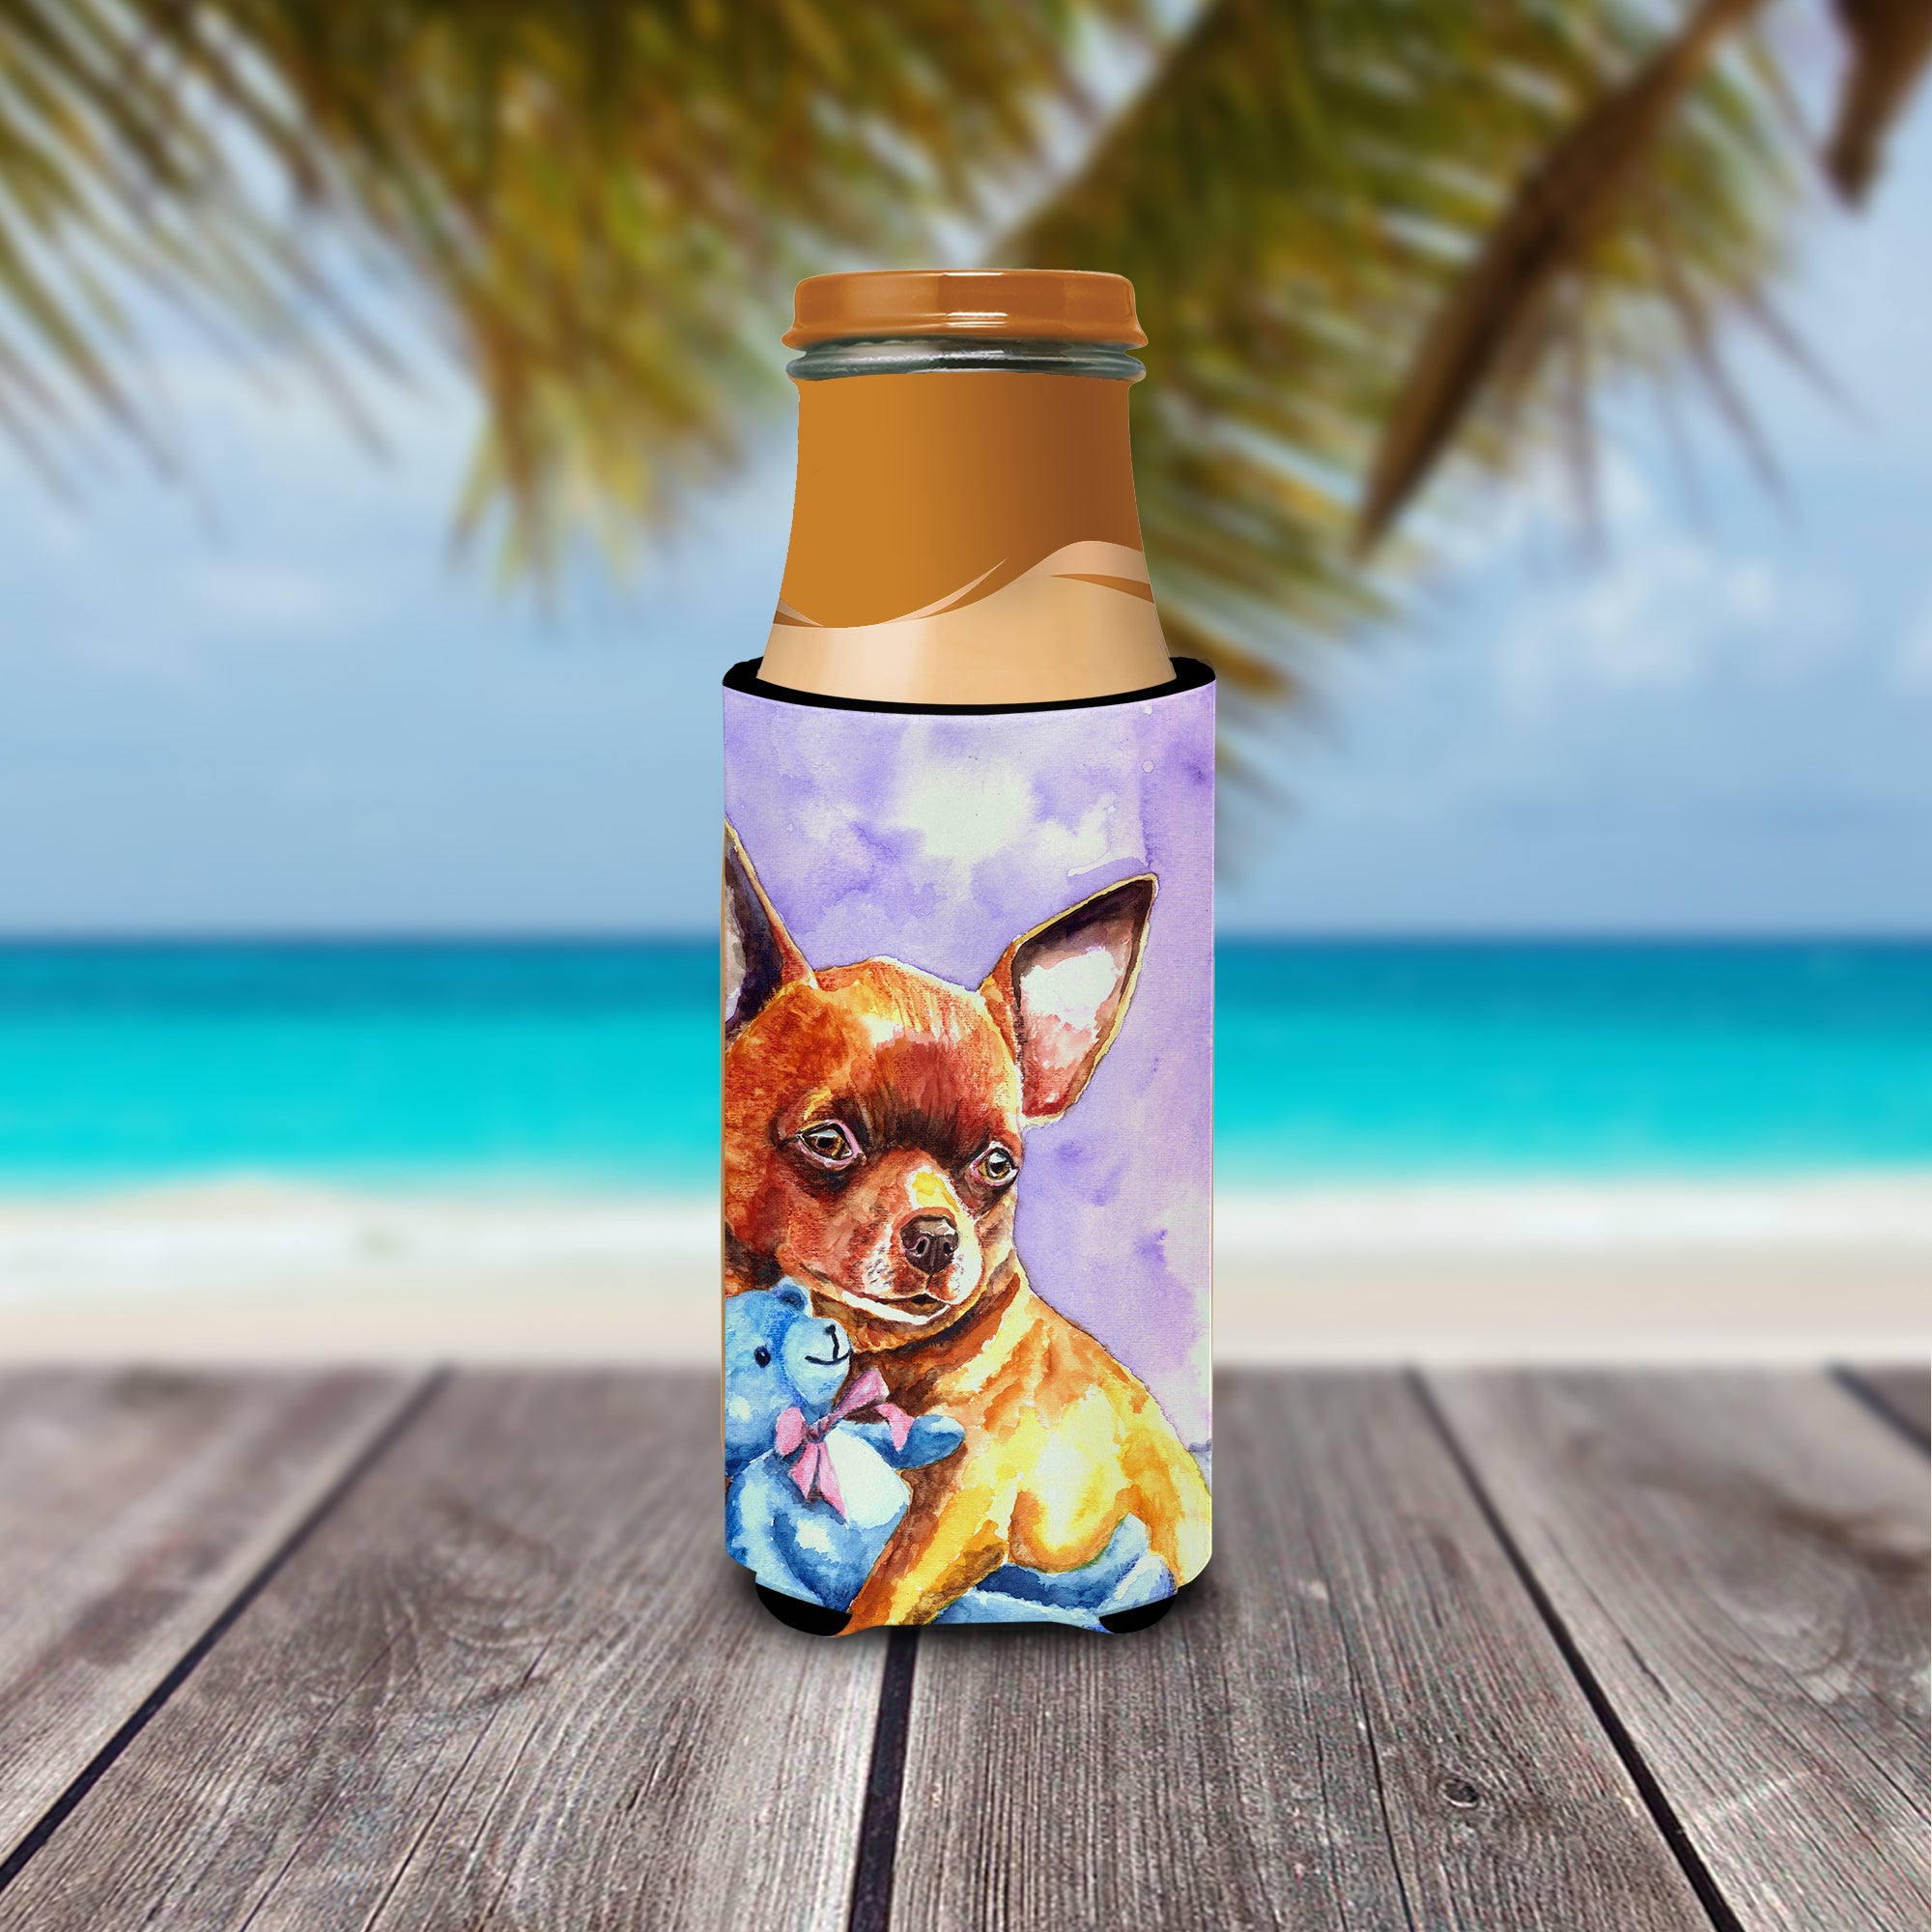 Chihuahua with Teddy Bear Ultra Beverage Insulators for slim cans 7340MUK